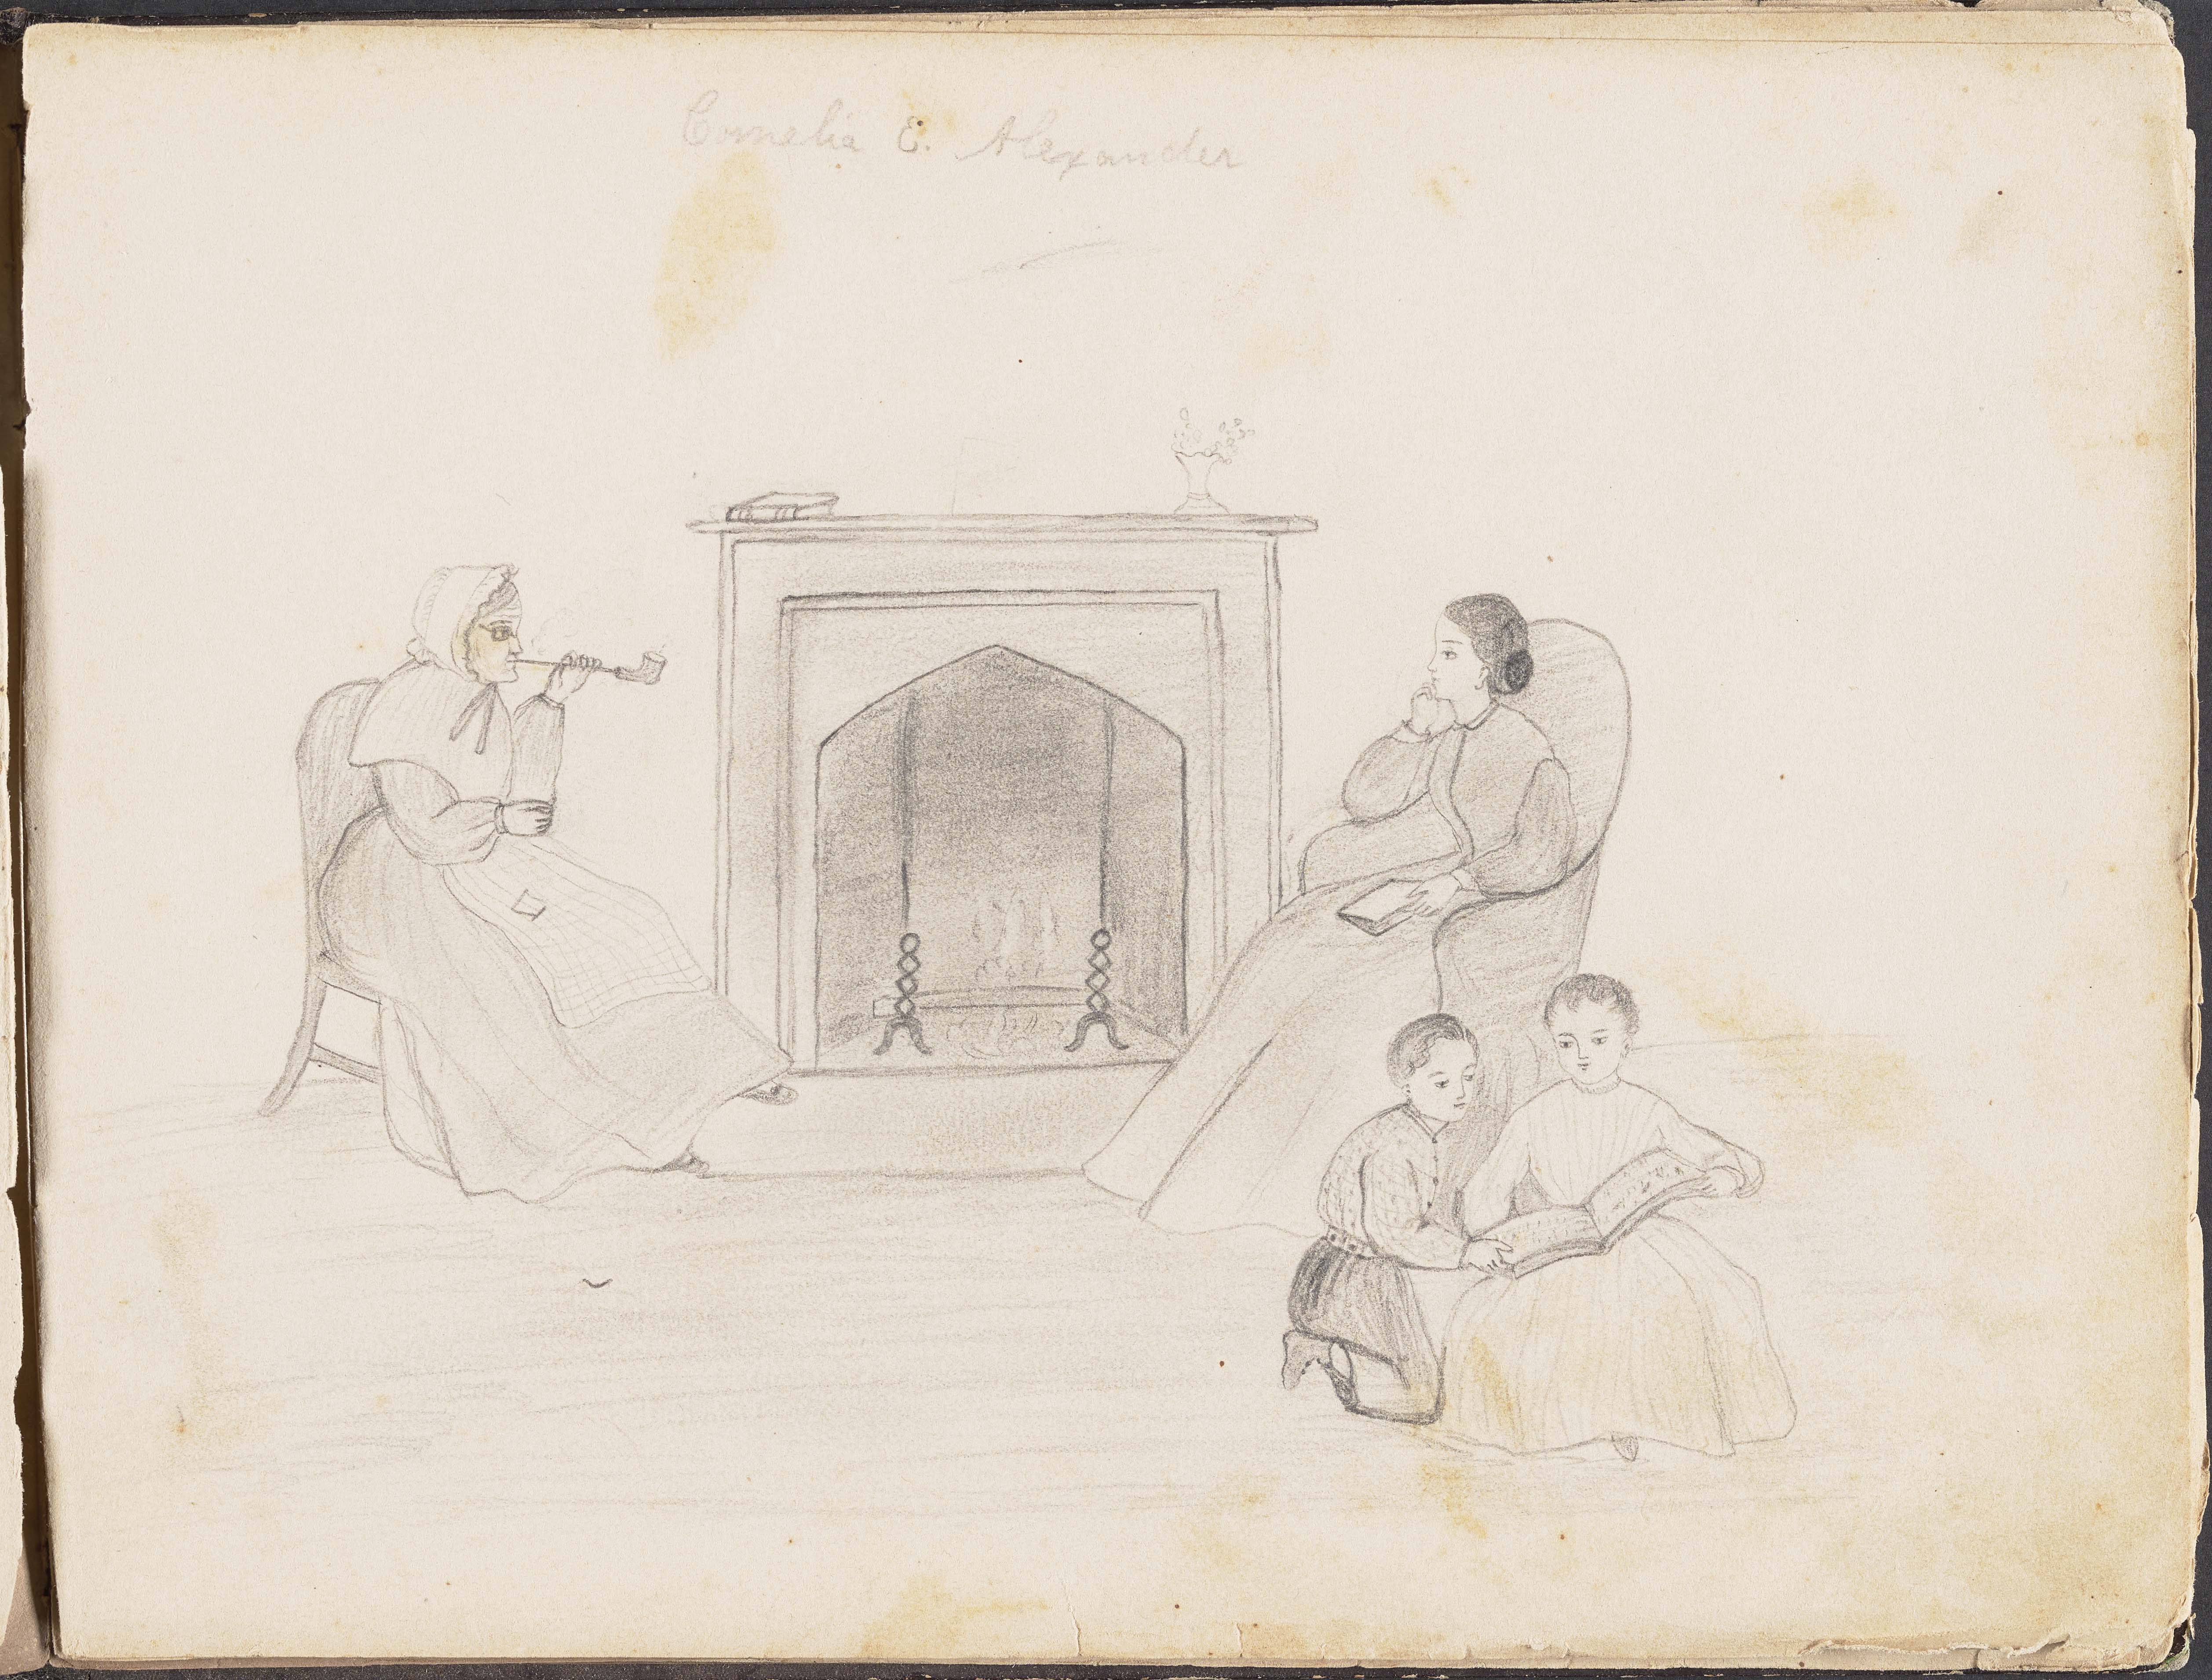 Sketch of two women and children around the hearth